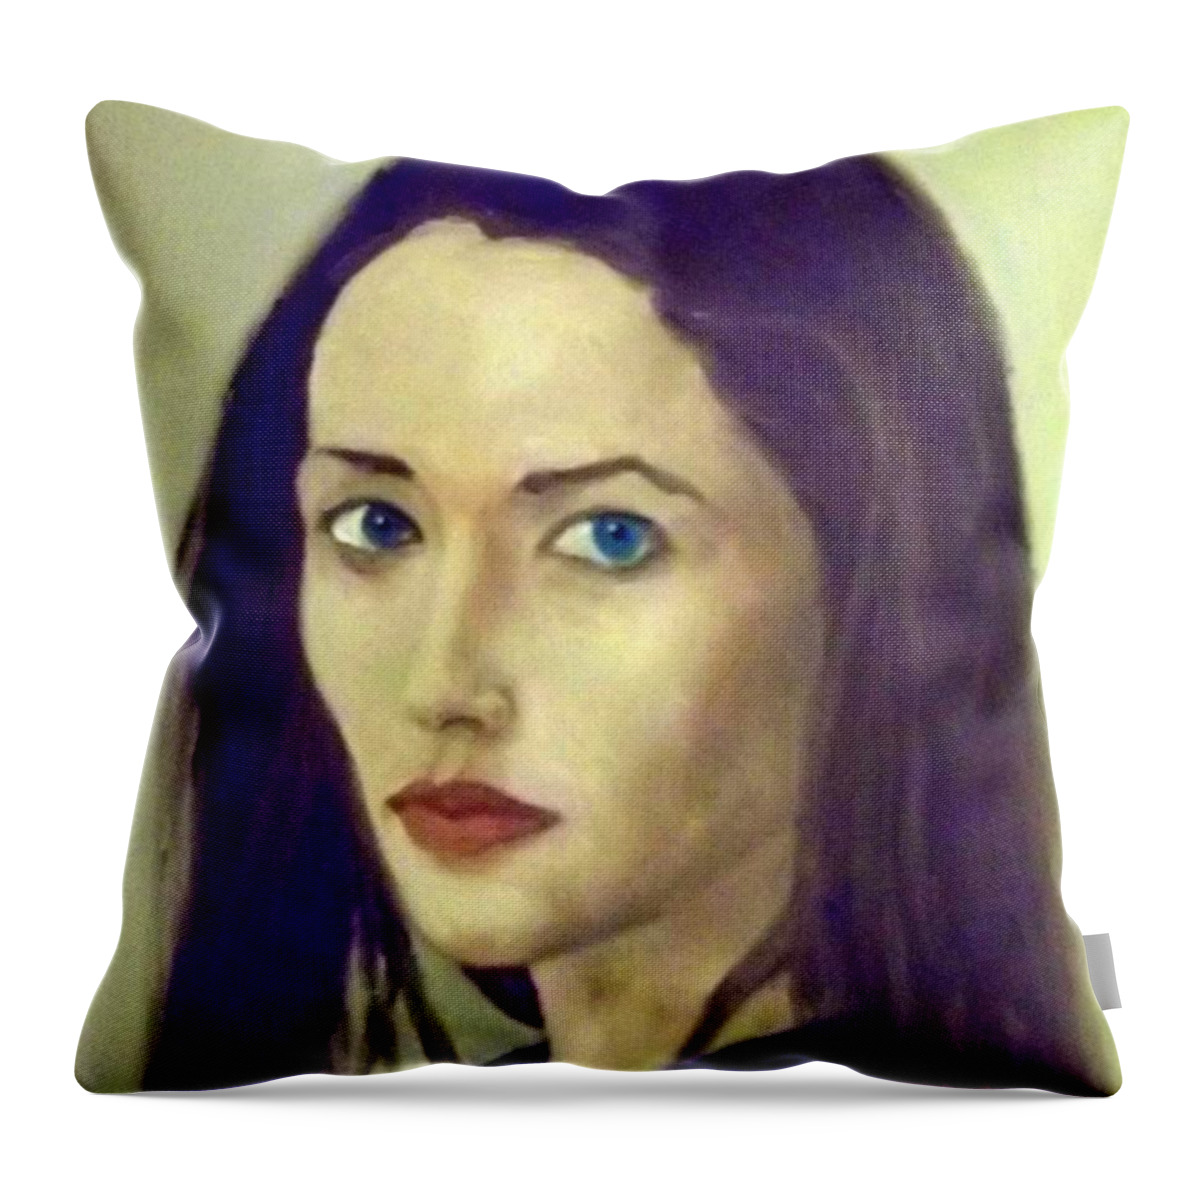 Young Throw Pillow featuring the painting The Brunette With Blue Eyes by Peter Gartner